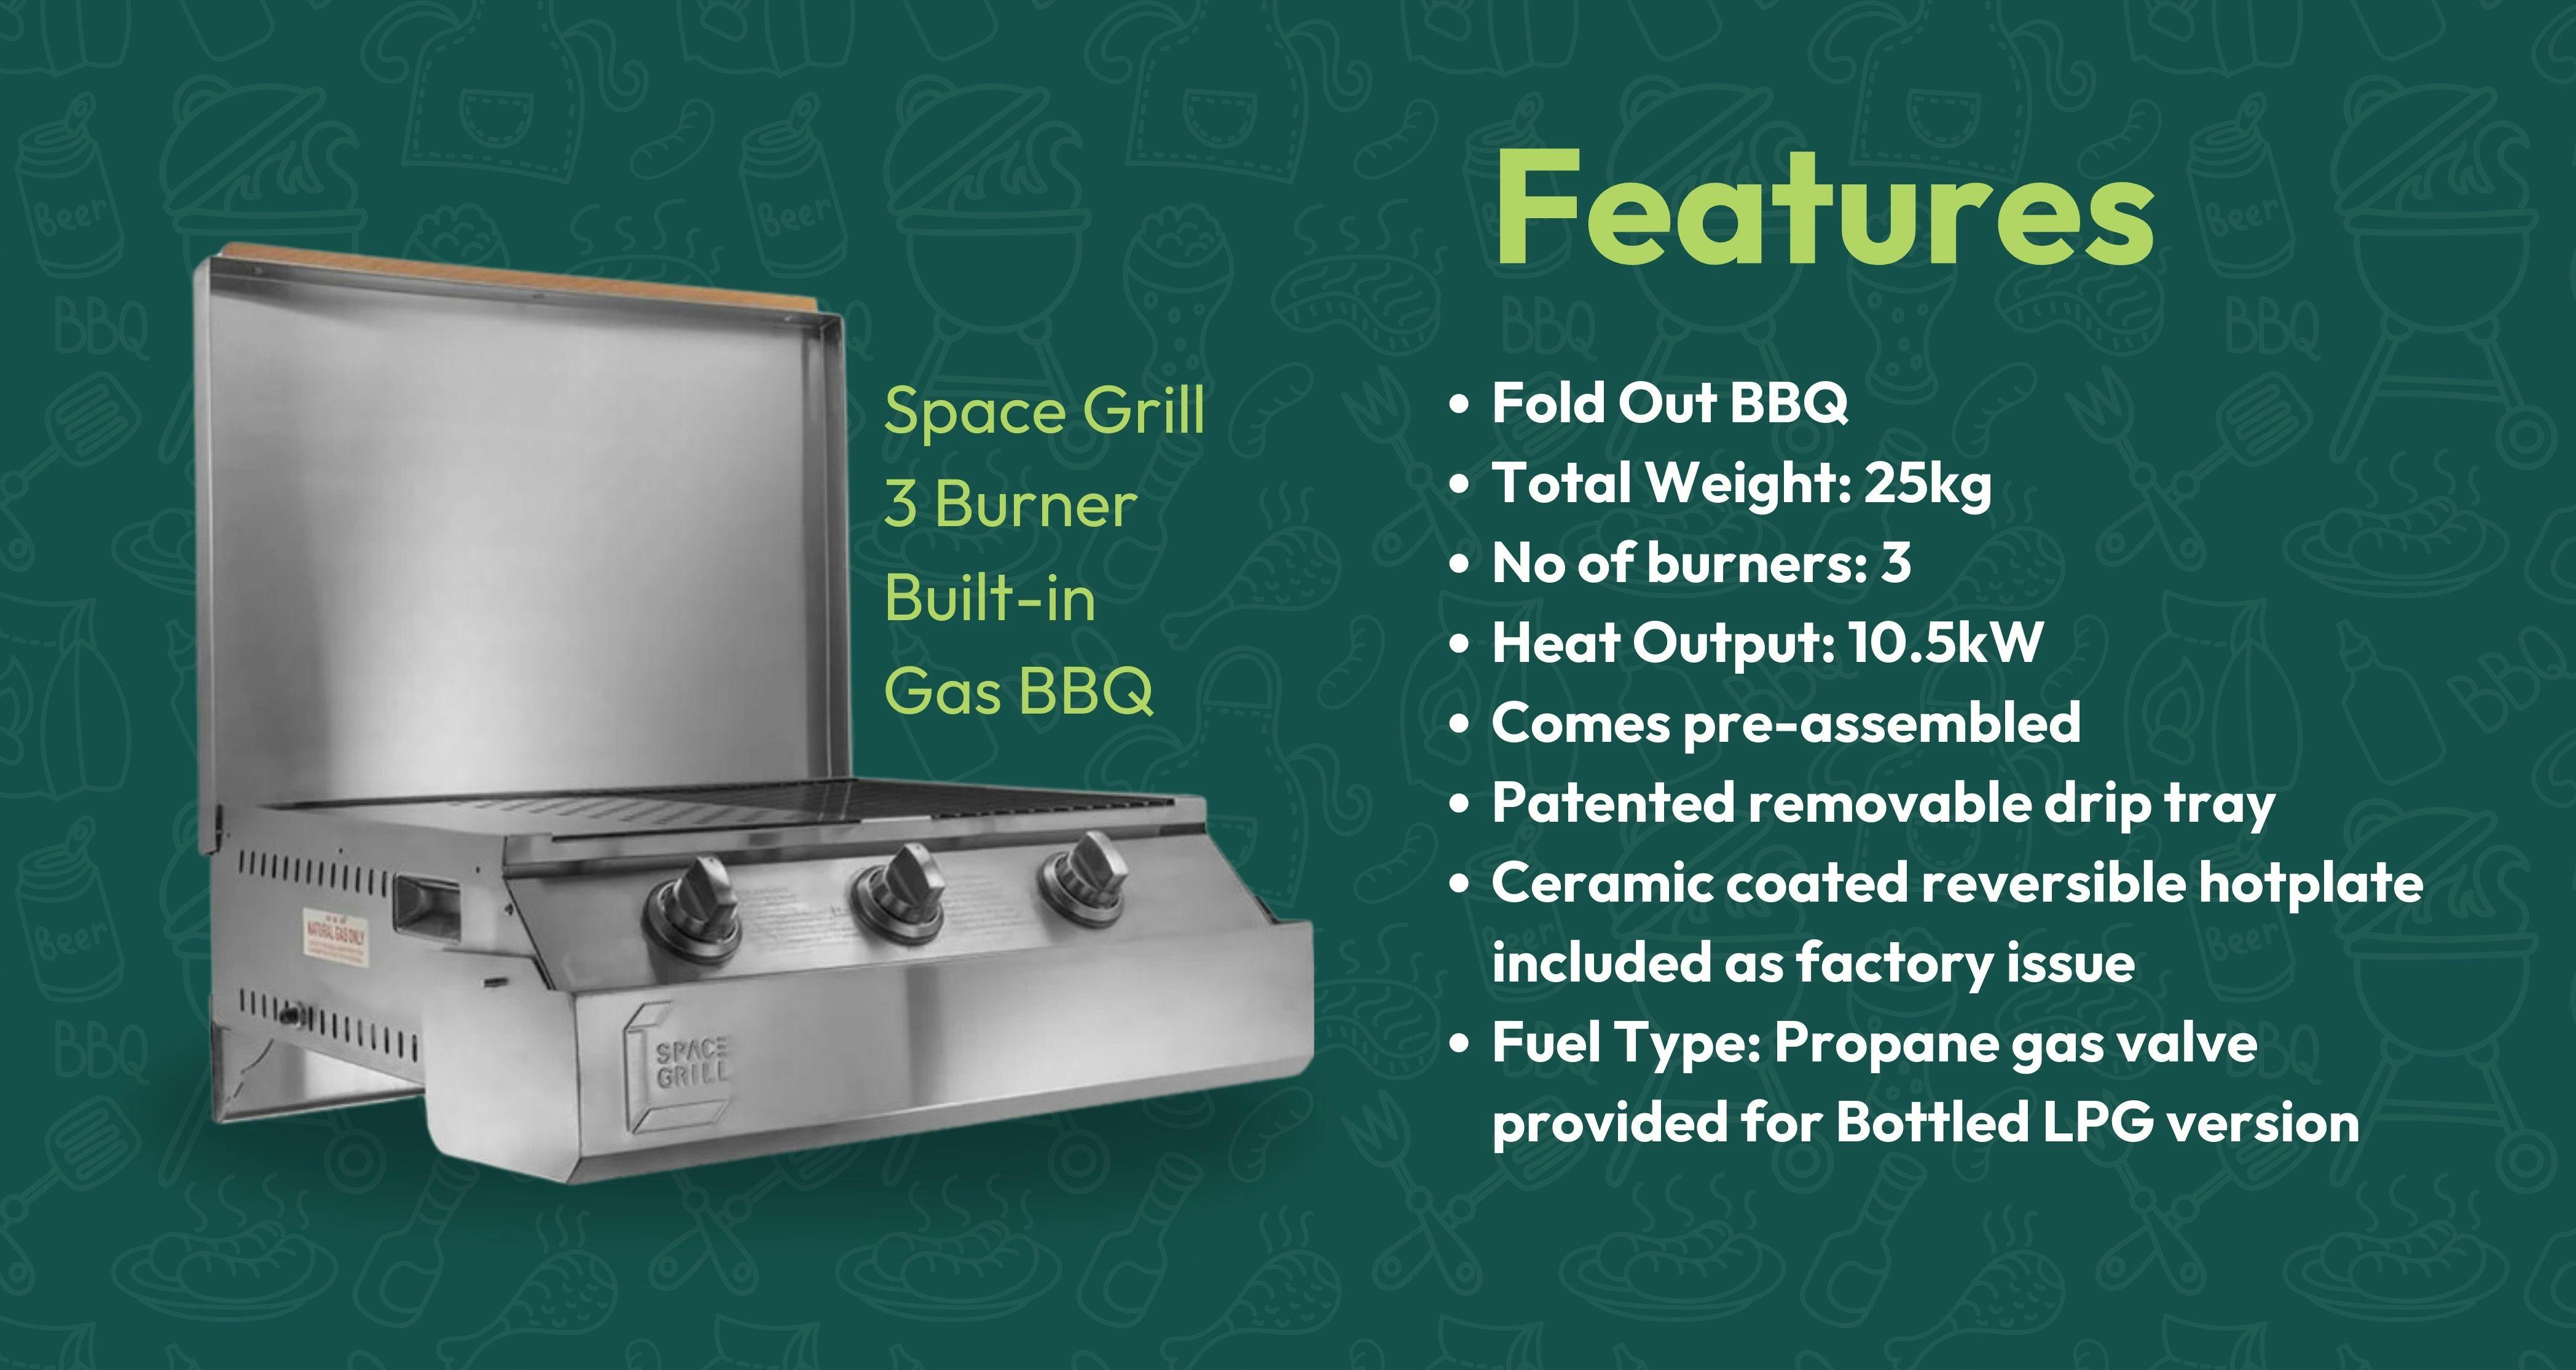 Space Grill 3 Burner Built-in Gas BBQ